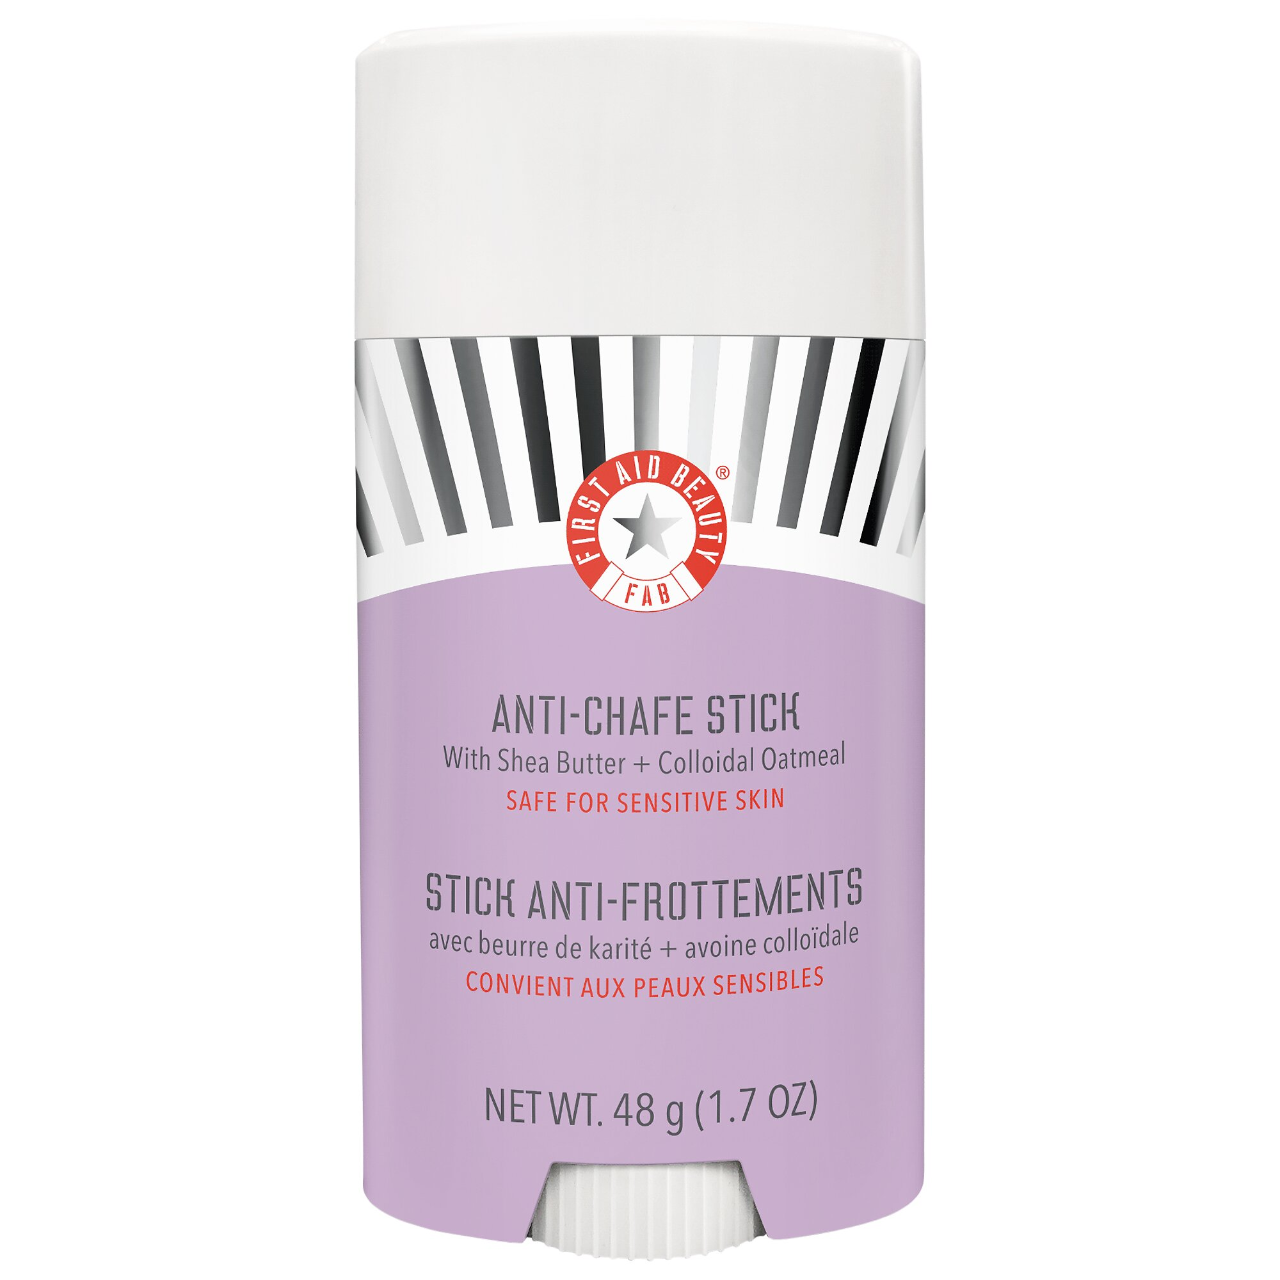 Anti-Chafe Stick with Shea Butter + Colloidal Oatmeal First Aid Beauty